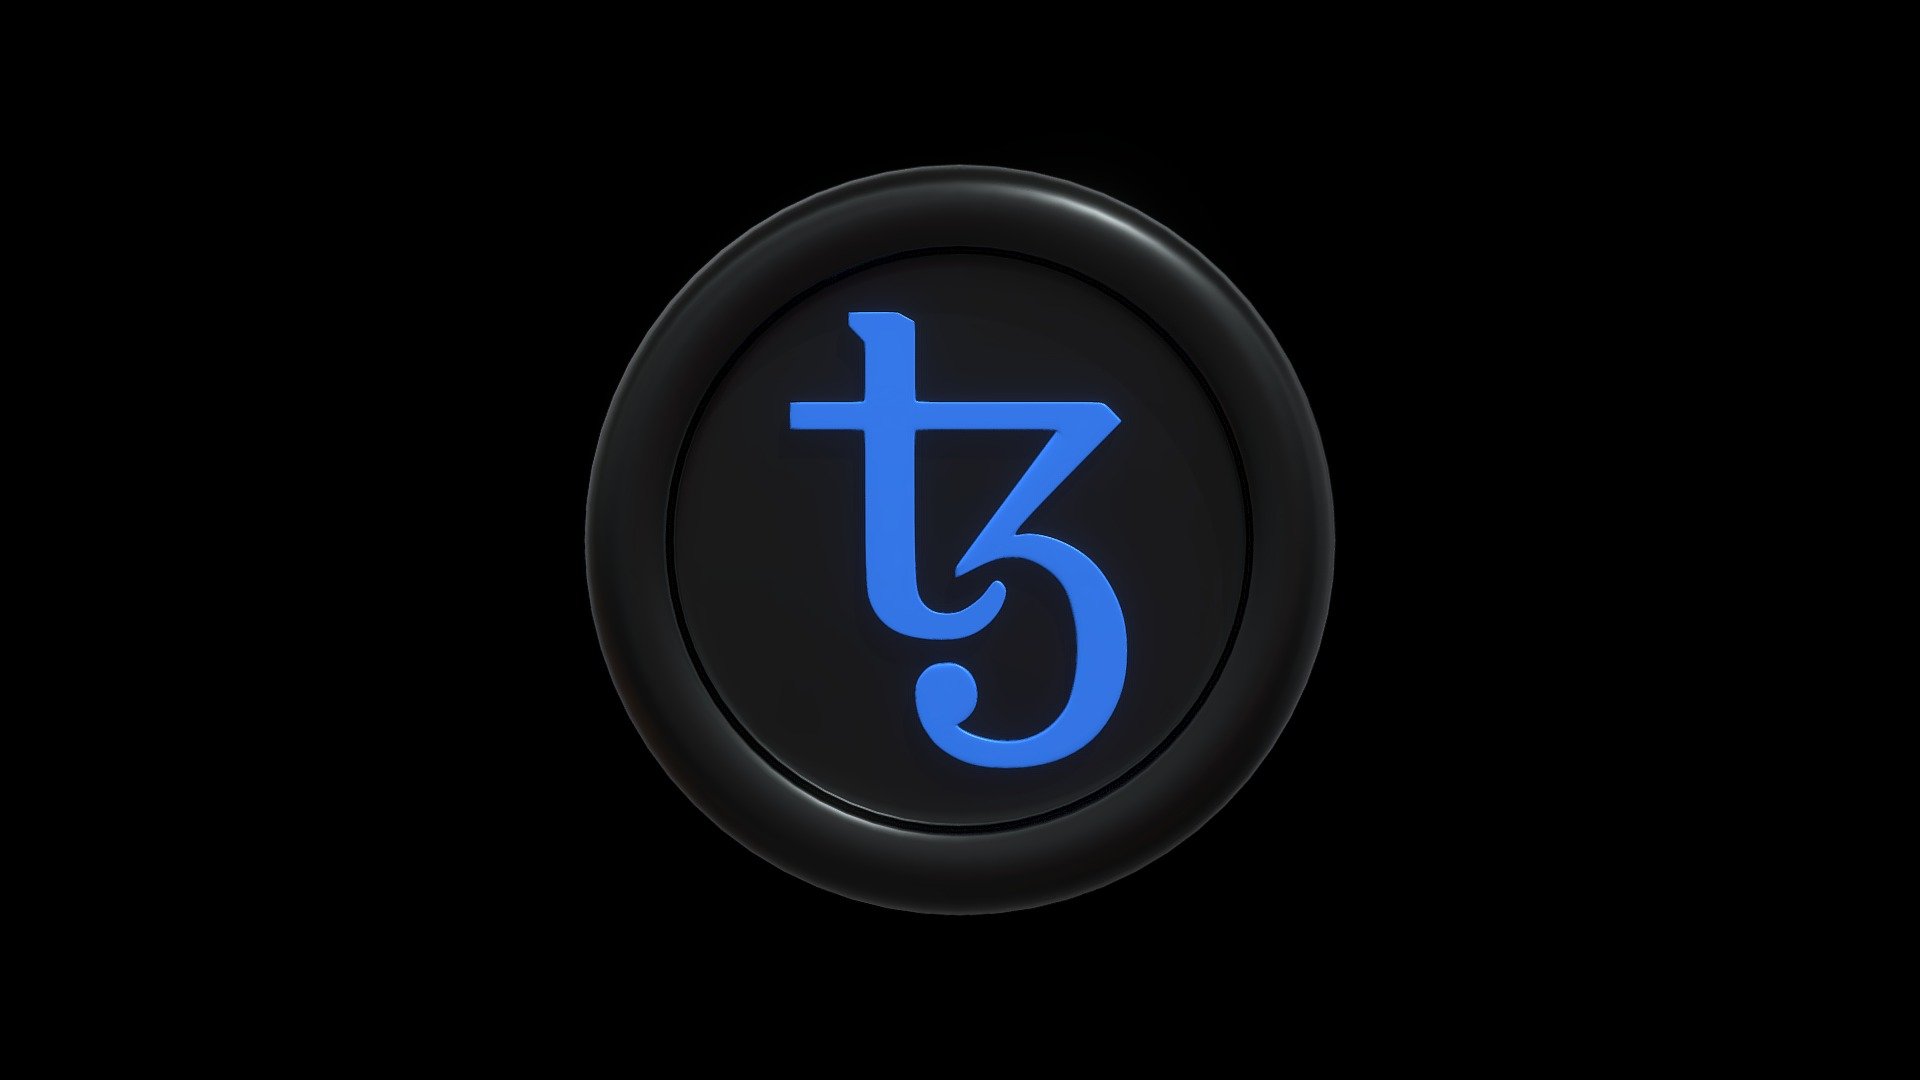 3D Tezos or XTZ Black Crypto Coin with cartoon style Made in Blender 3.3.1

This model does include a TEXTURE, DIFFUSE, METALLIC, AND ROUGHNESS MAP, but if you want to change the color you can change it in the blend file, just use the principled bsdf and play with the Roughness, Metallic, and Base Color parameter 3d model